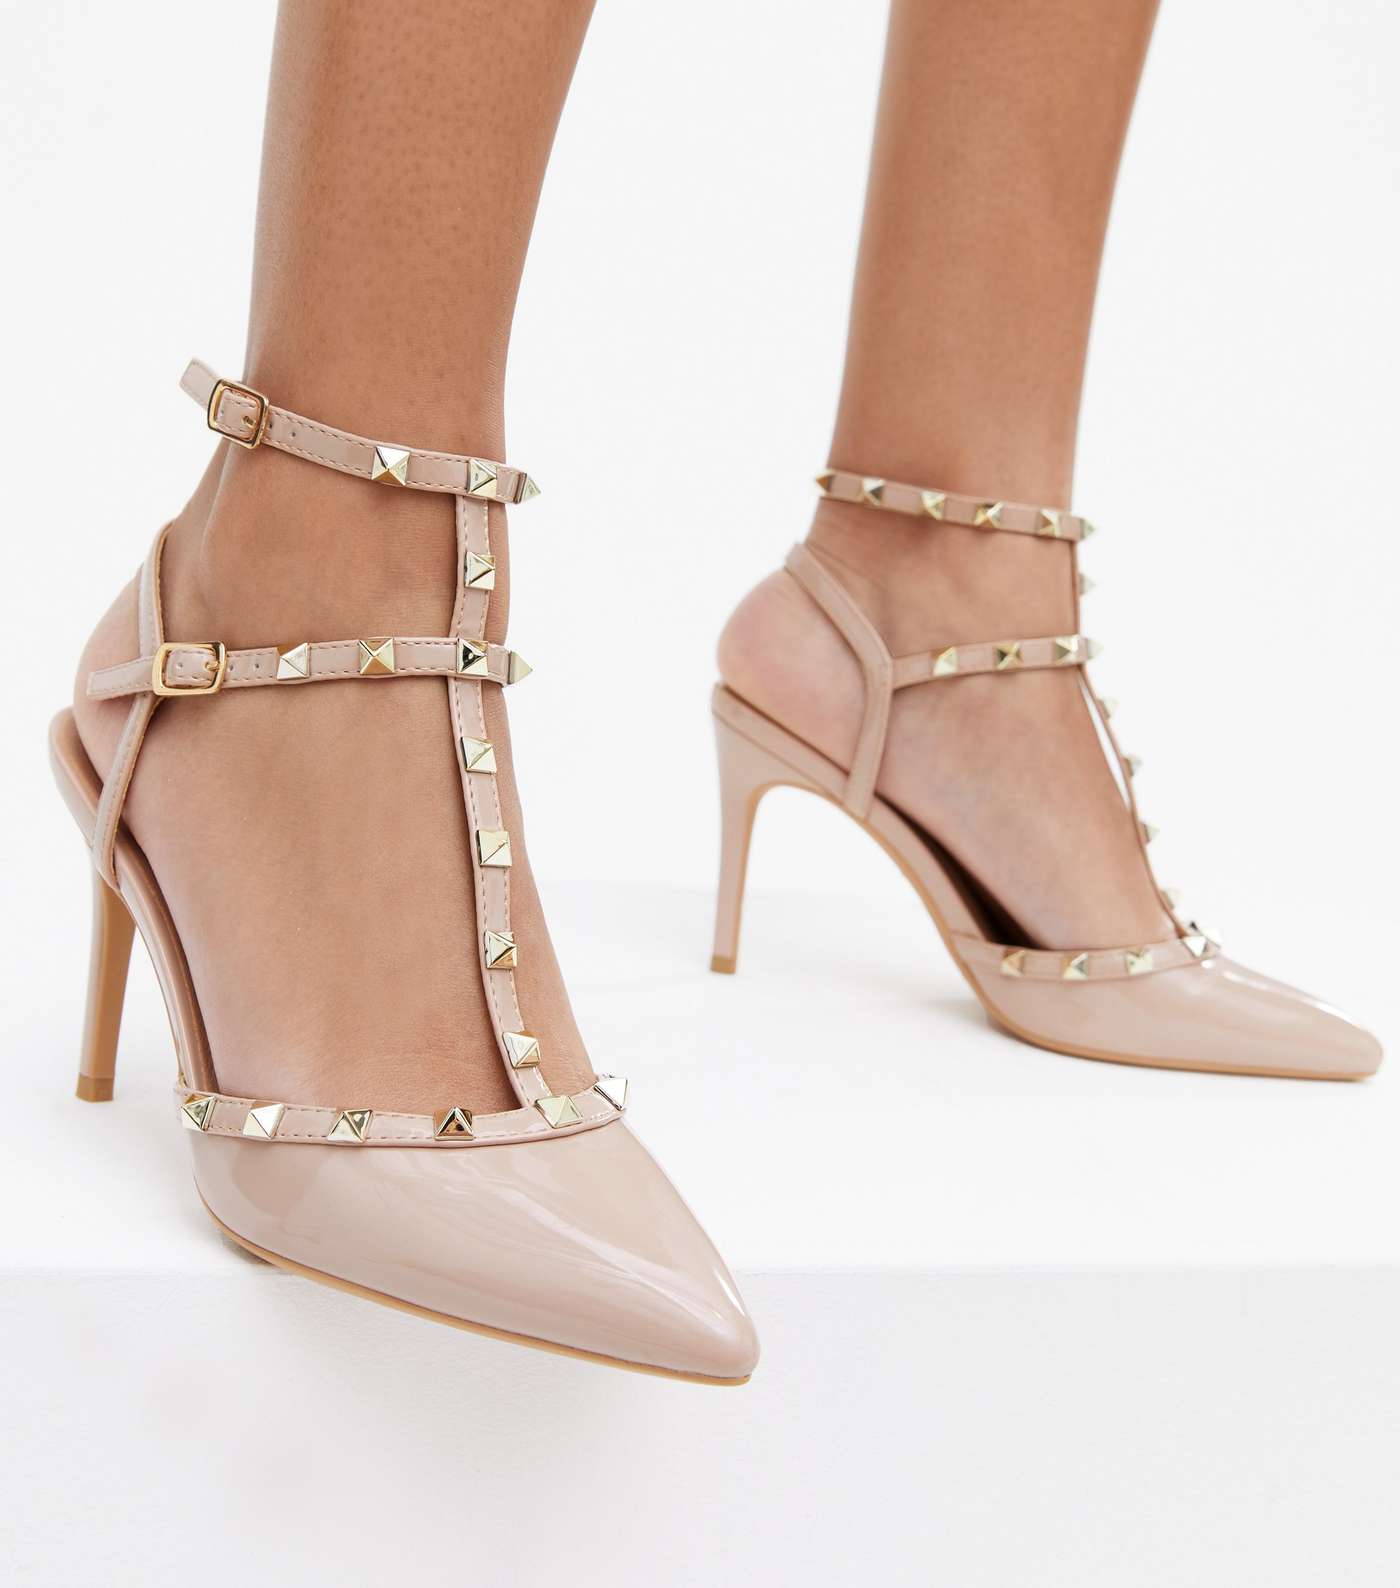 Pale Pink Patent Studded Caged Stiletto Heel Court Shoes Image 2